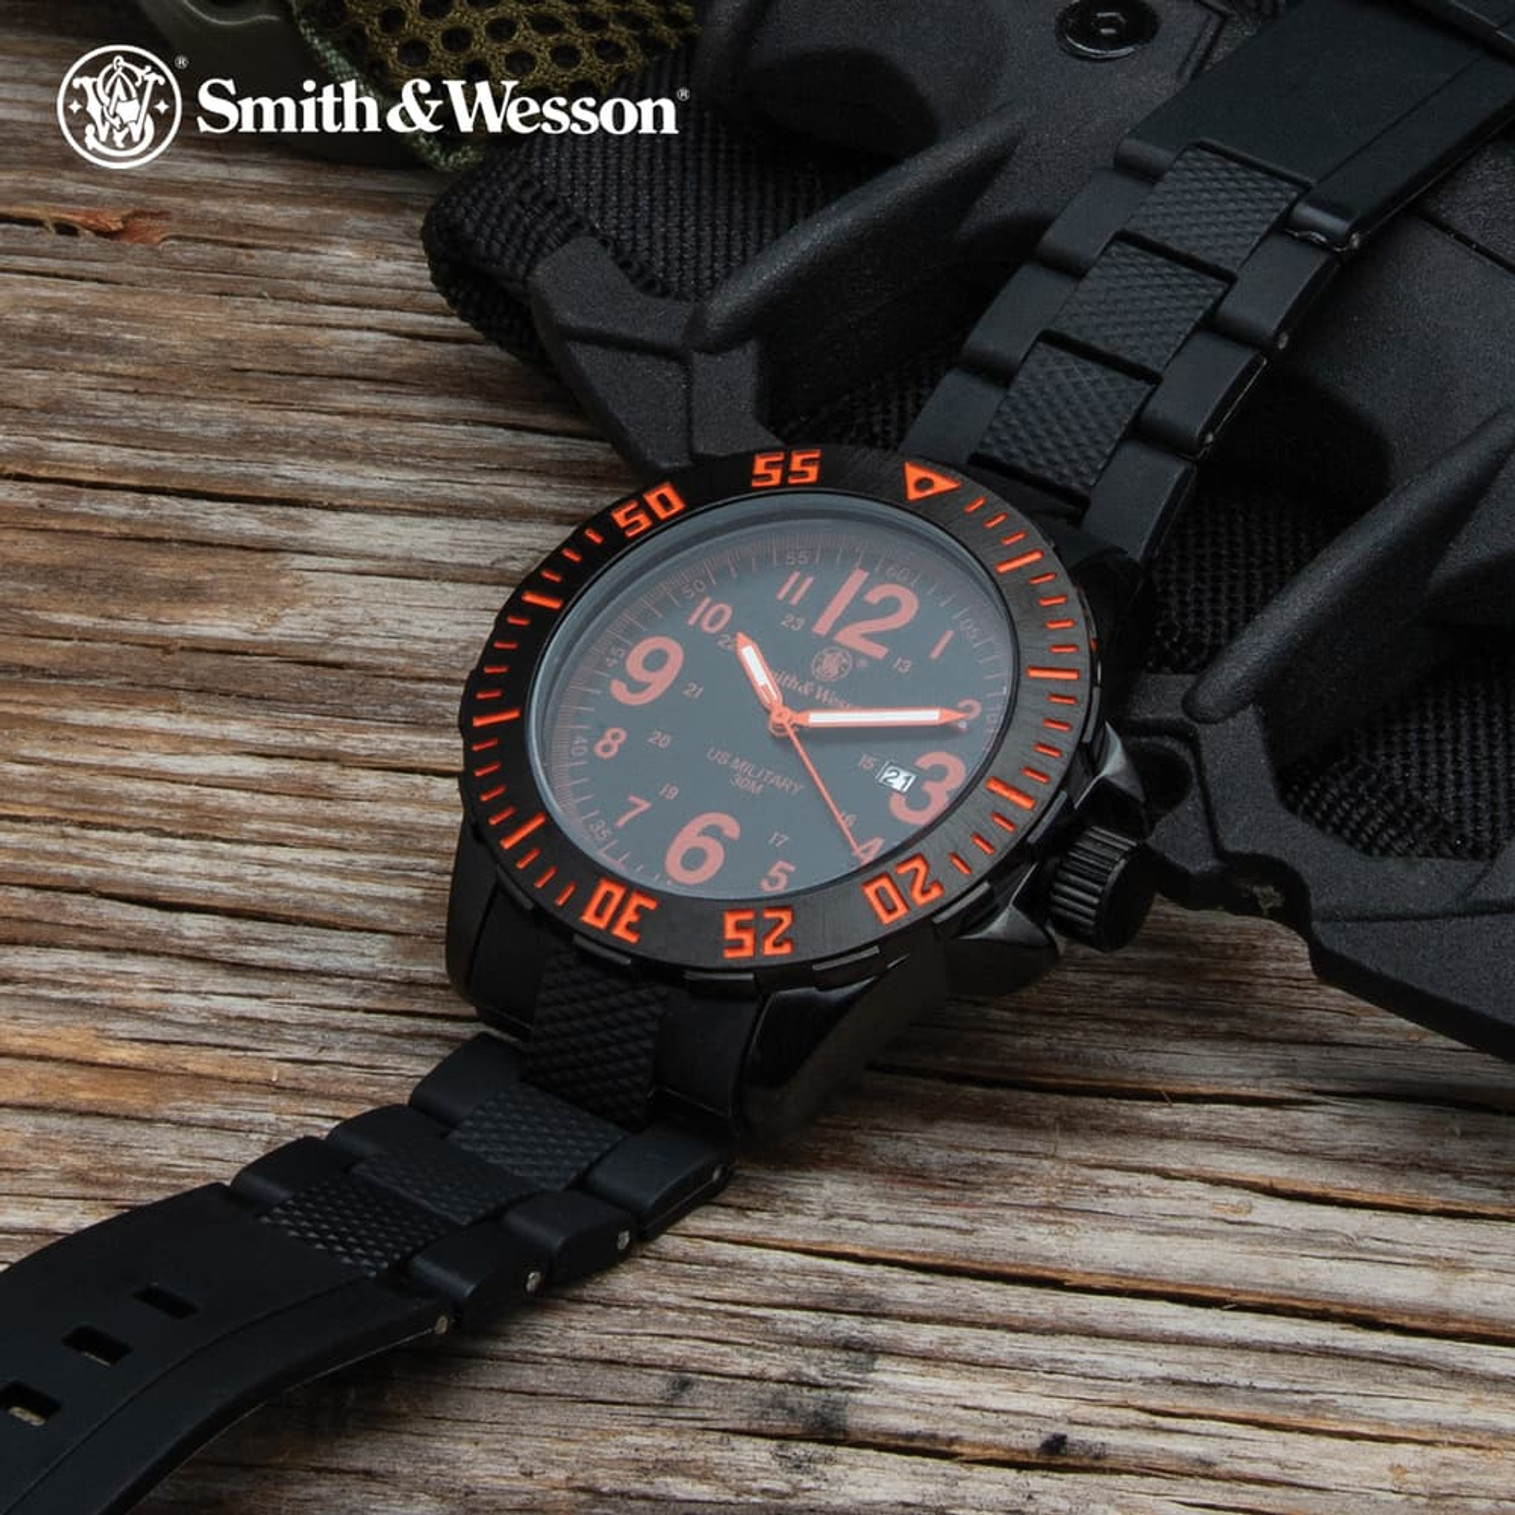 Smith & Wesson Military Field Watch